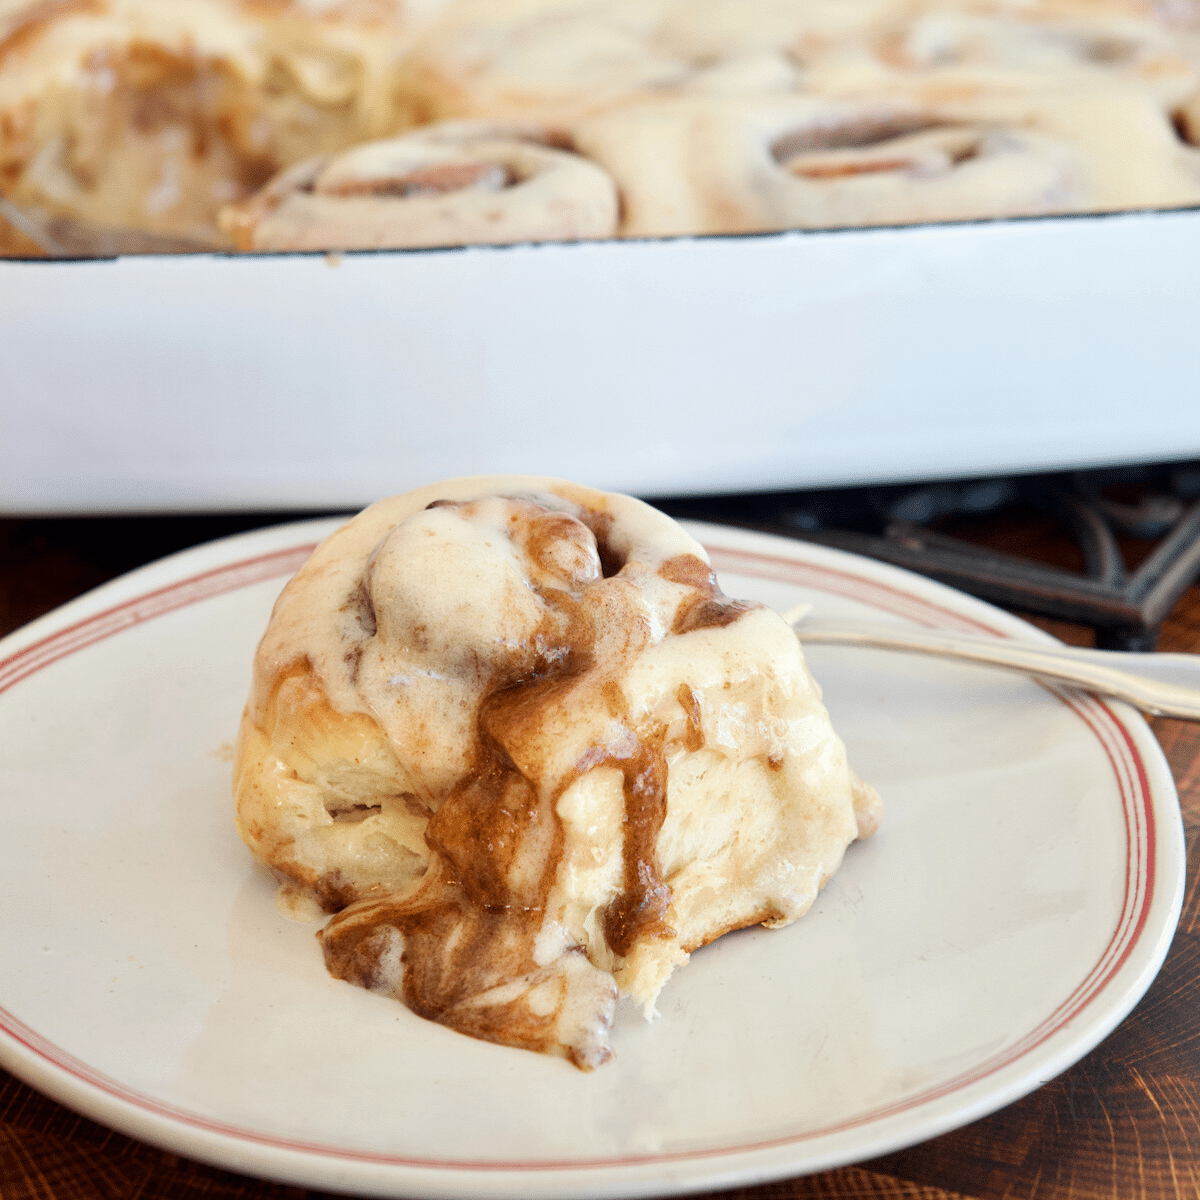 Single Gooey Cinnamon Roll on a plate with a tray of frosting cinnamon rolls behind.